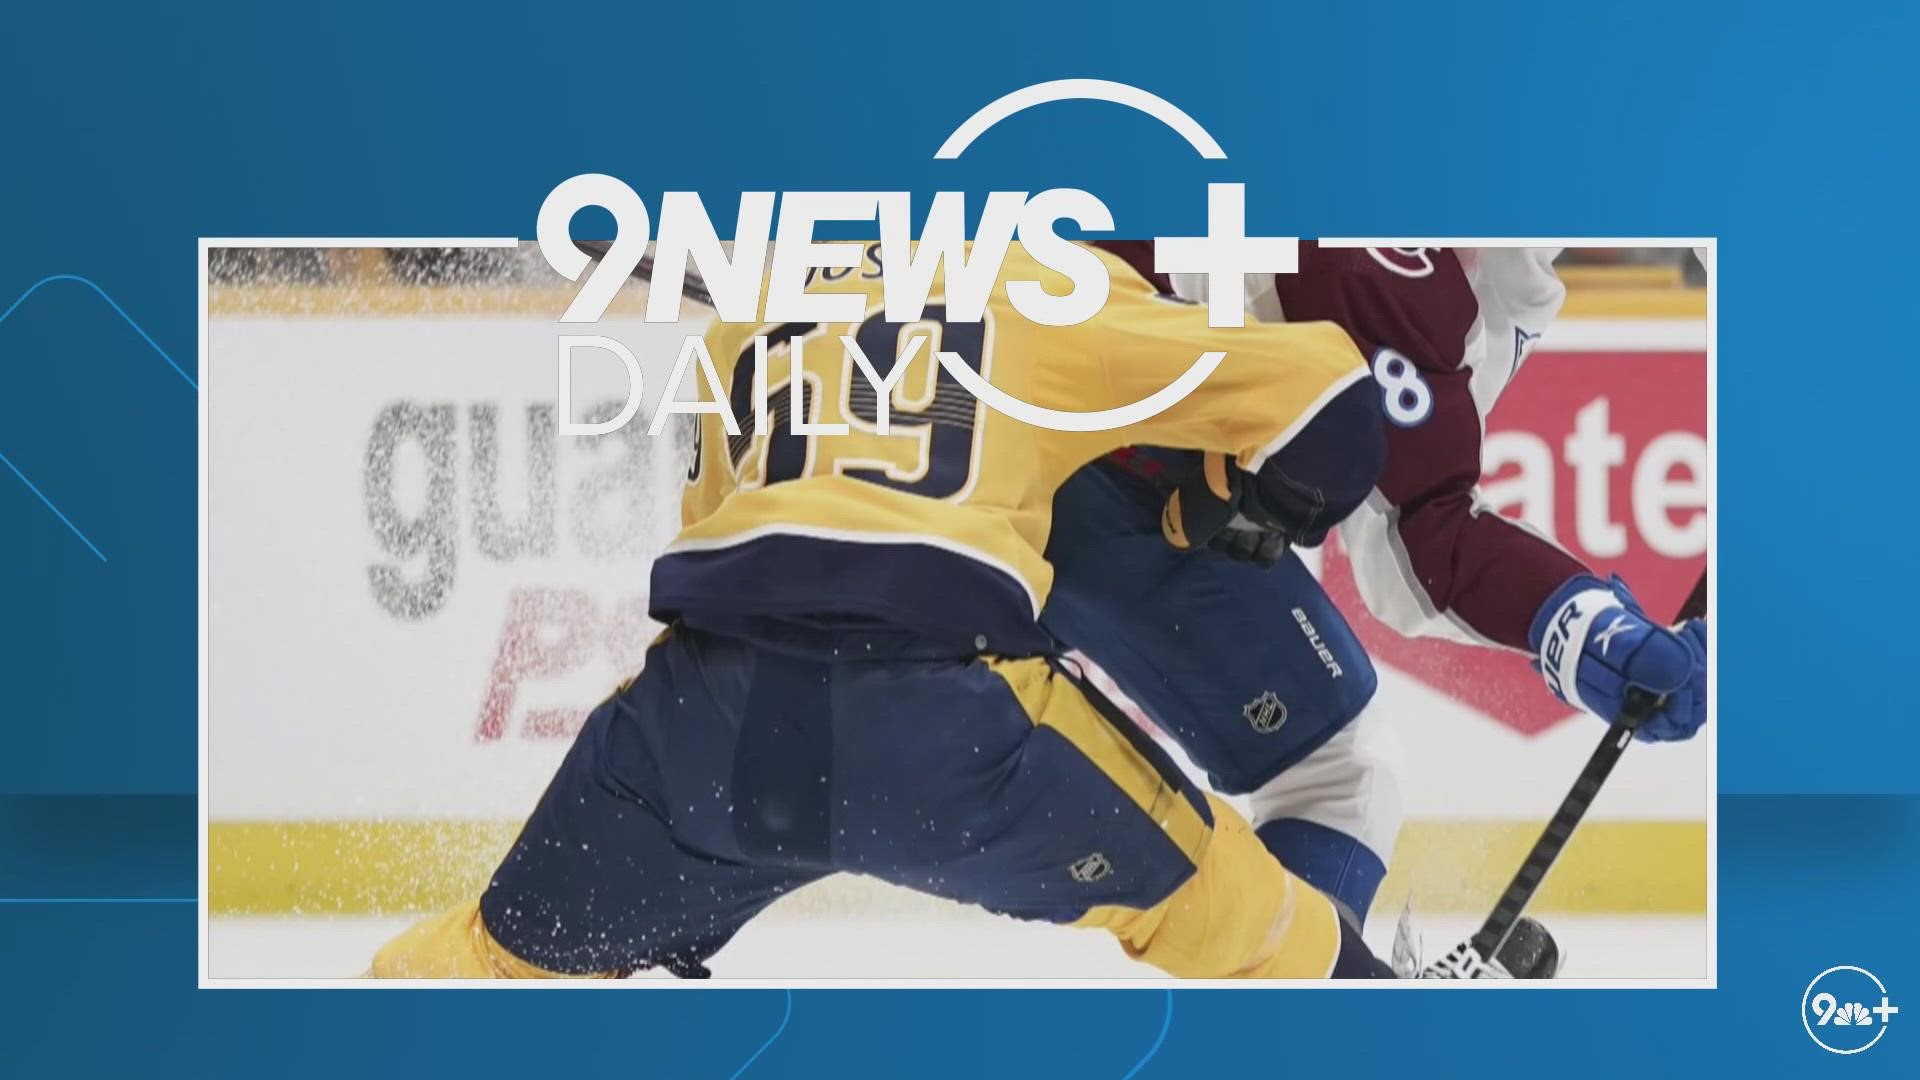 9NEWS sports reporter Arielle Orsuto is in Tampa with a preview of what to expect in Game 4 of the Stanley Cup Final between the Avalanche and Lightning.